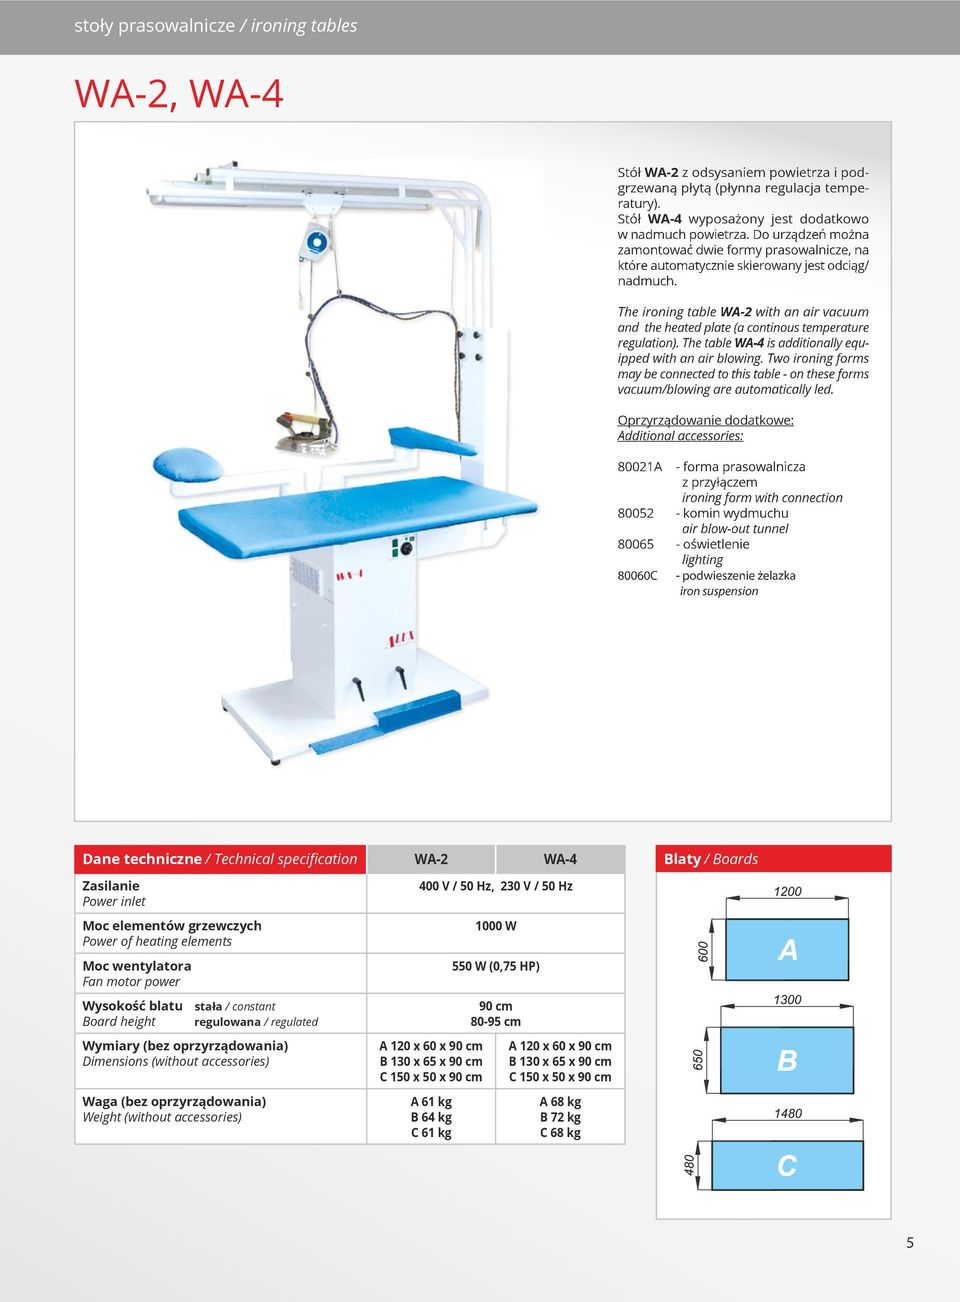 The ironing table WA-2 with an air vacuum and the heated plate (a continous temperature regulation). The table WA-4 is additionally equipped with an air blowing.